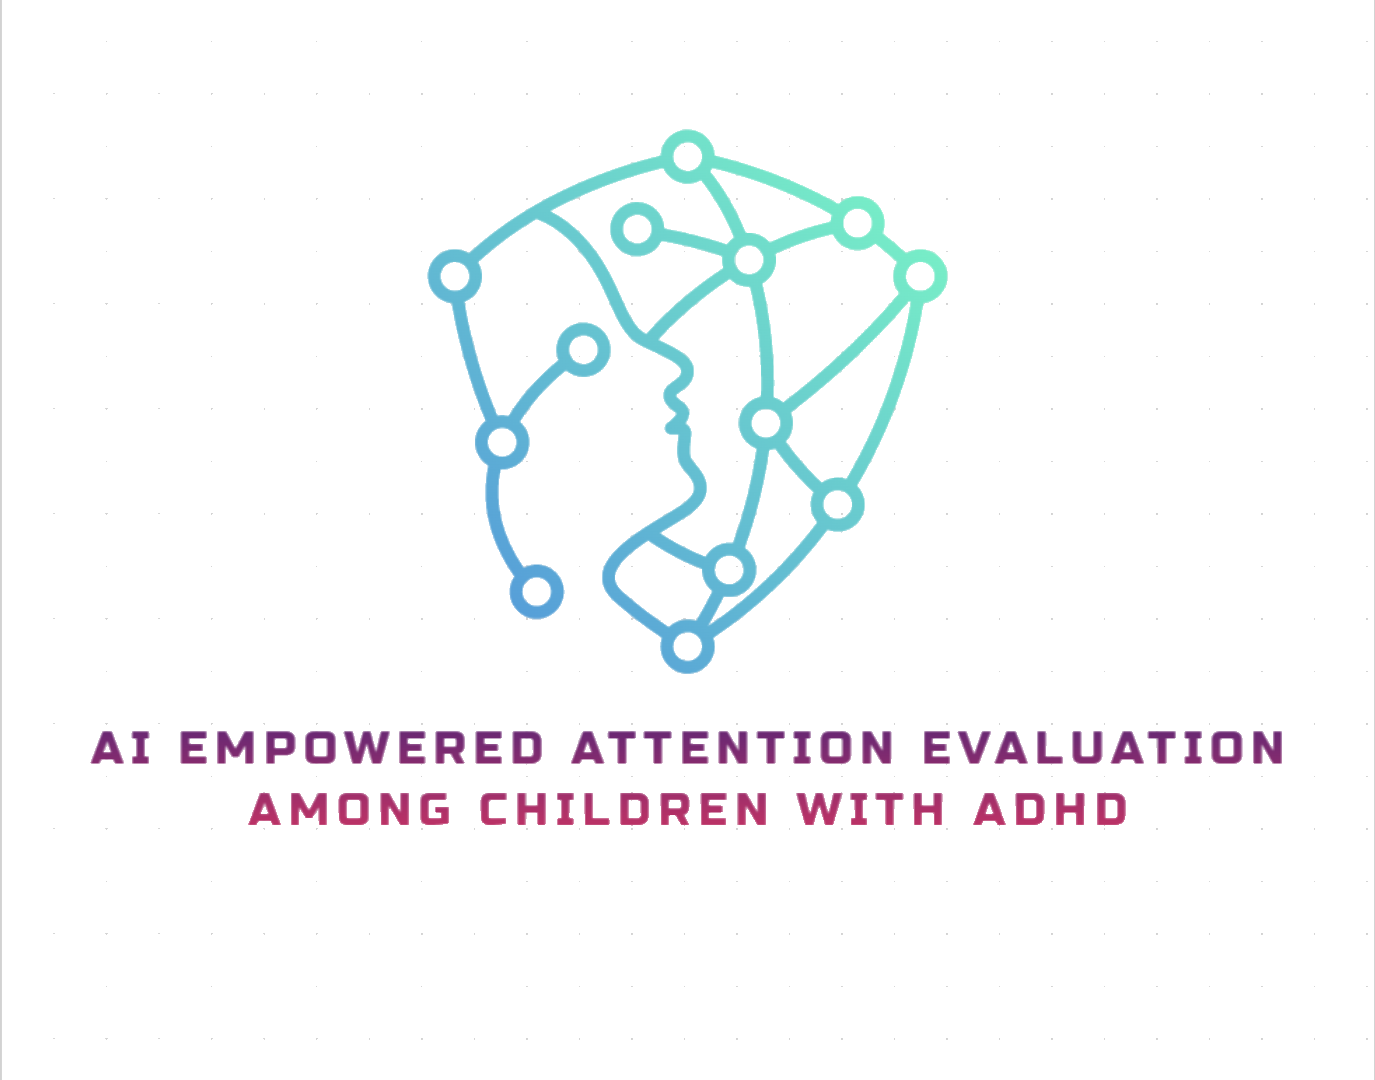 AI Empowered Attention Evaluation among Children with ADHD